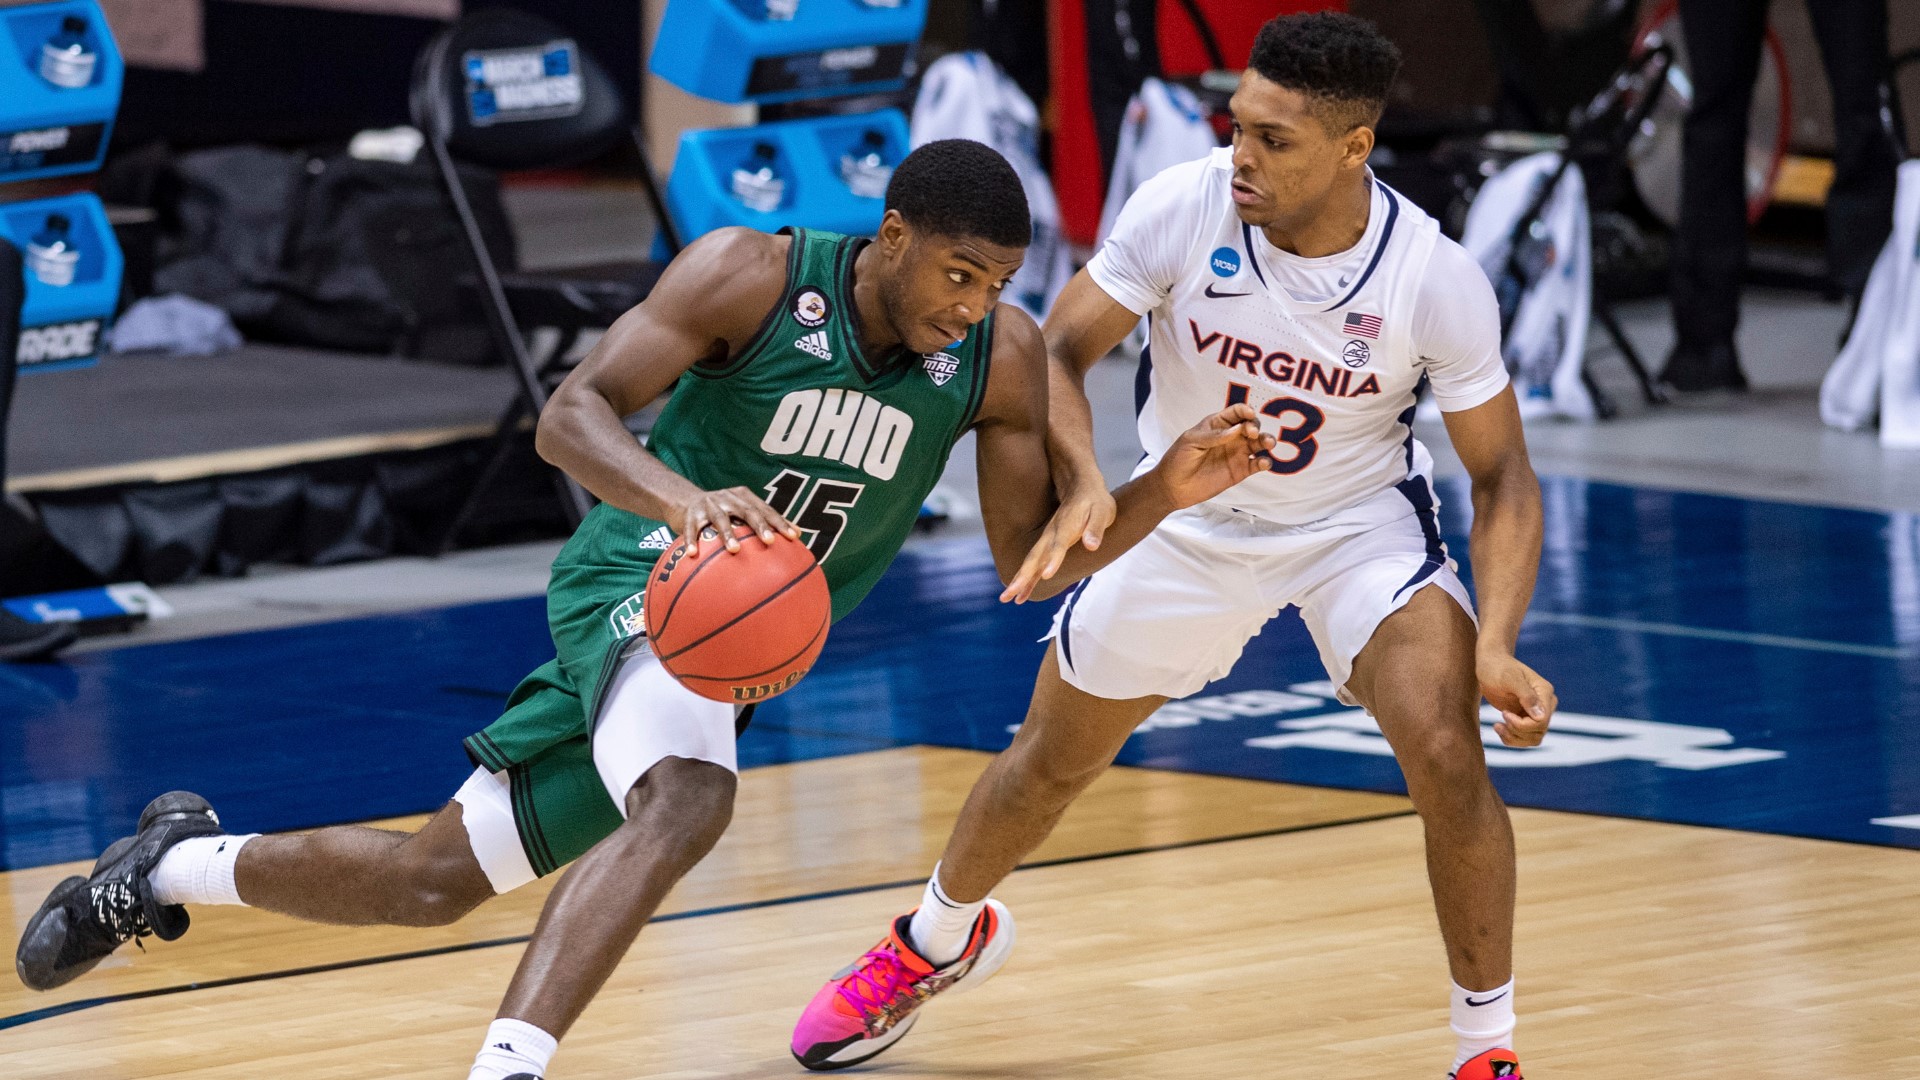 Ohio (17-7) has now won its last three NCAA first-round games — beating Georgetown in 2010 and Michigan in 2012.